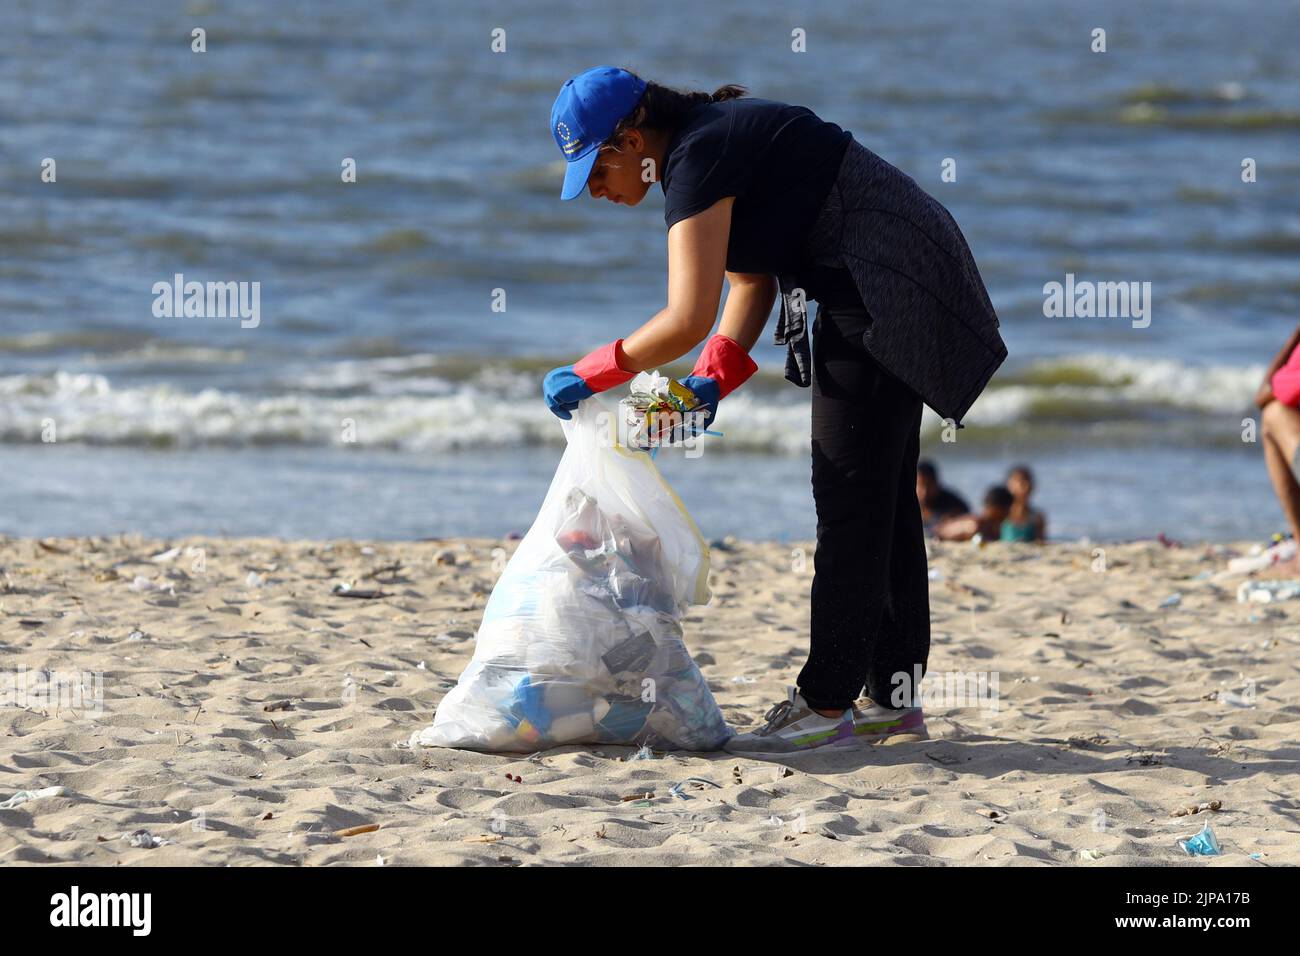 (220816) -- ALEXANDRIA, Aug. 16, 2022 (Xinhua) -- A woman collects waste from the beach in Alexandria, Egypt, Aug. 13, 2022. On the beaches in the Egyptian city of Alexandria, a group of Egyptian young people are usually seen holding green and white plastic bags to collect the scattering waste. They are participants in a cleanup campaign organized by Banlastic Egypt, an environmental project launched by a group of youth in the Mediterranean city. The project seeks to raise the public's awareness of plastic pollution and how single-use plastic waste harms marine life if it eventually end Stock Photo